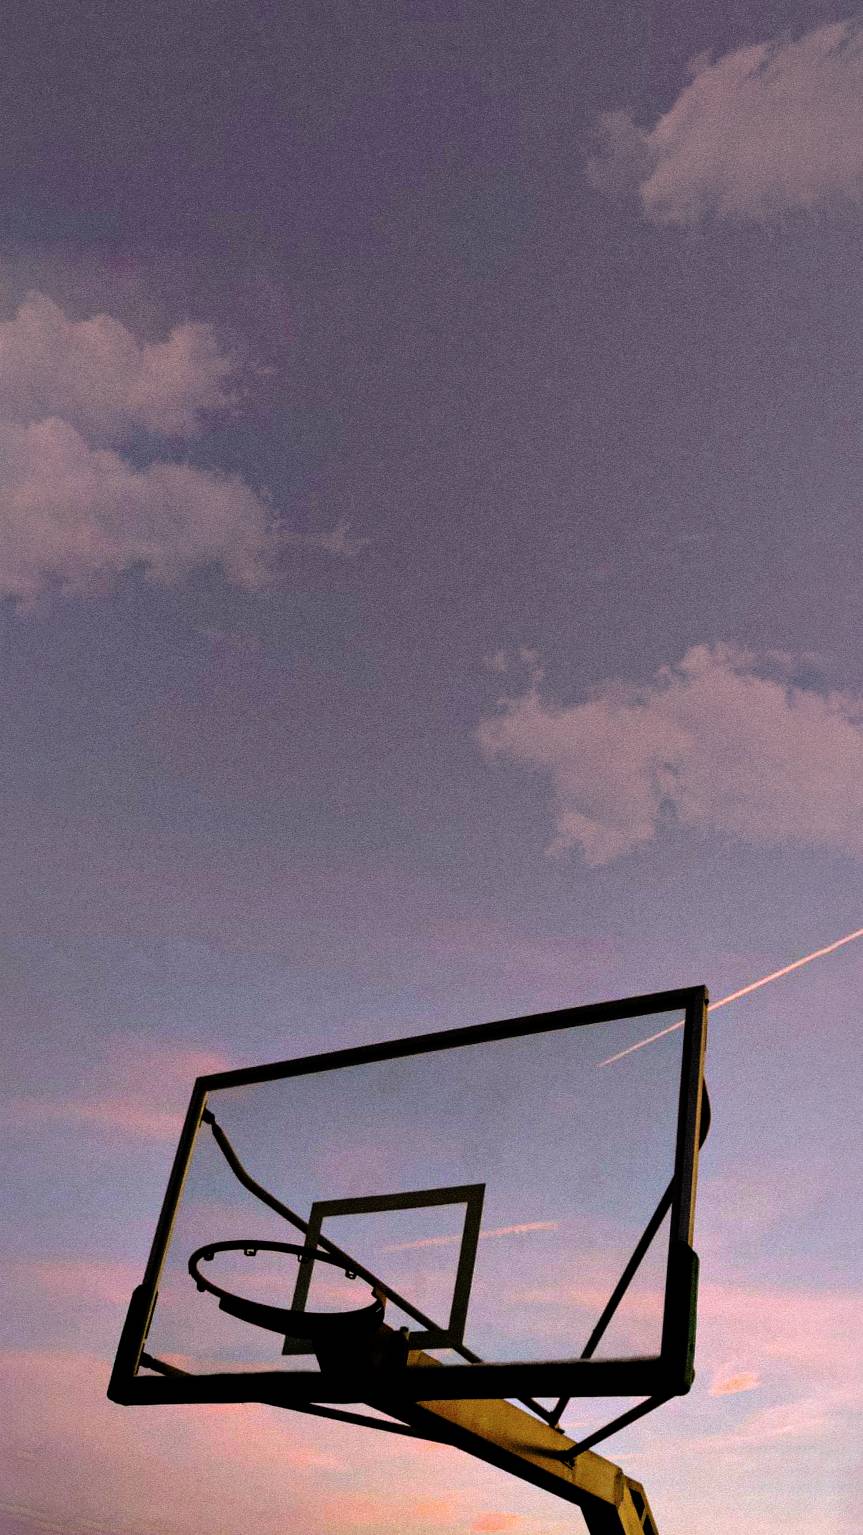 Basket and clouds